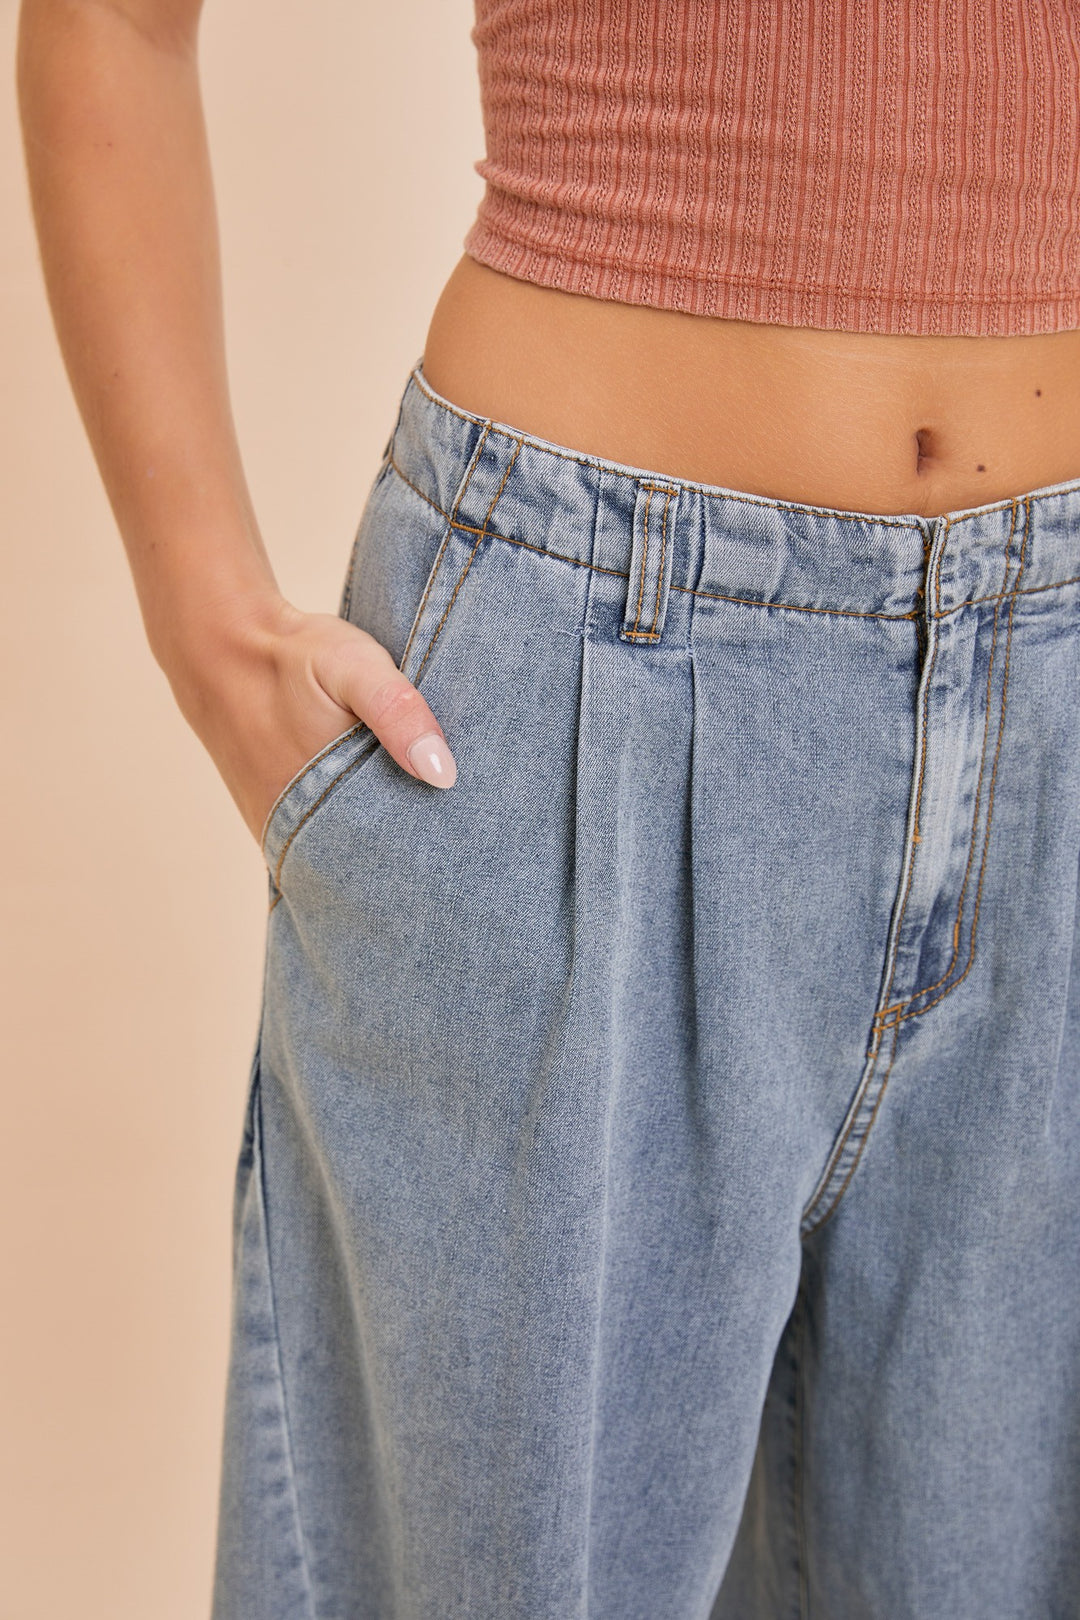 PERRY FLARE PANTS